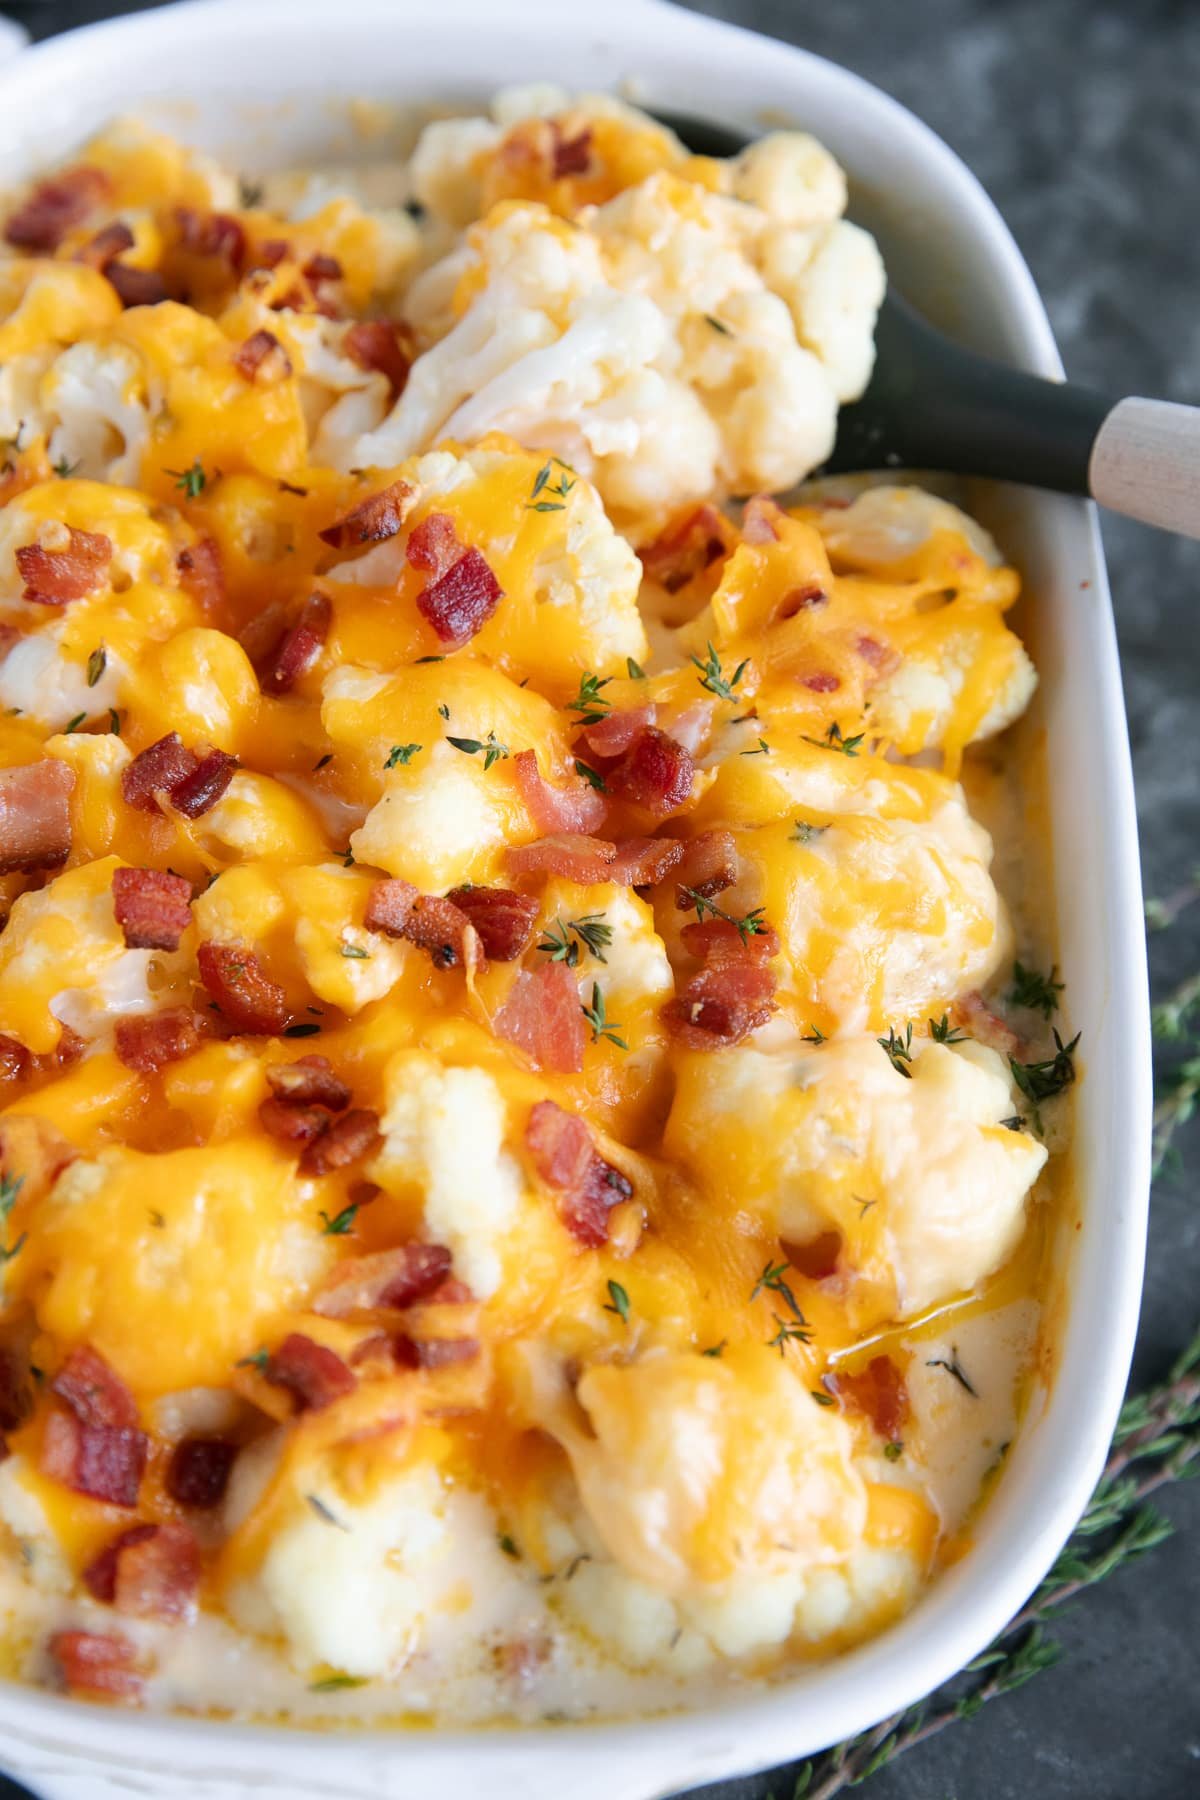 8. Cheesy Cauliflower Bake with Bacon - The Forked Spoon